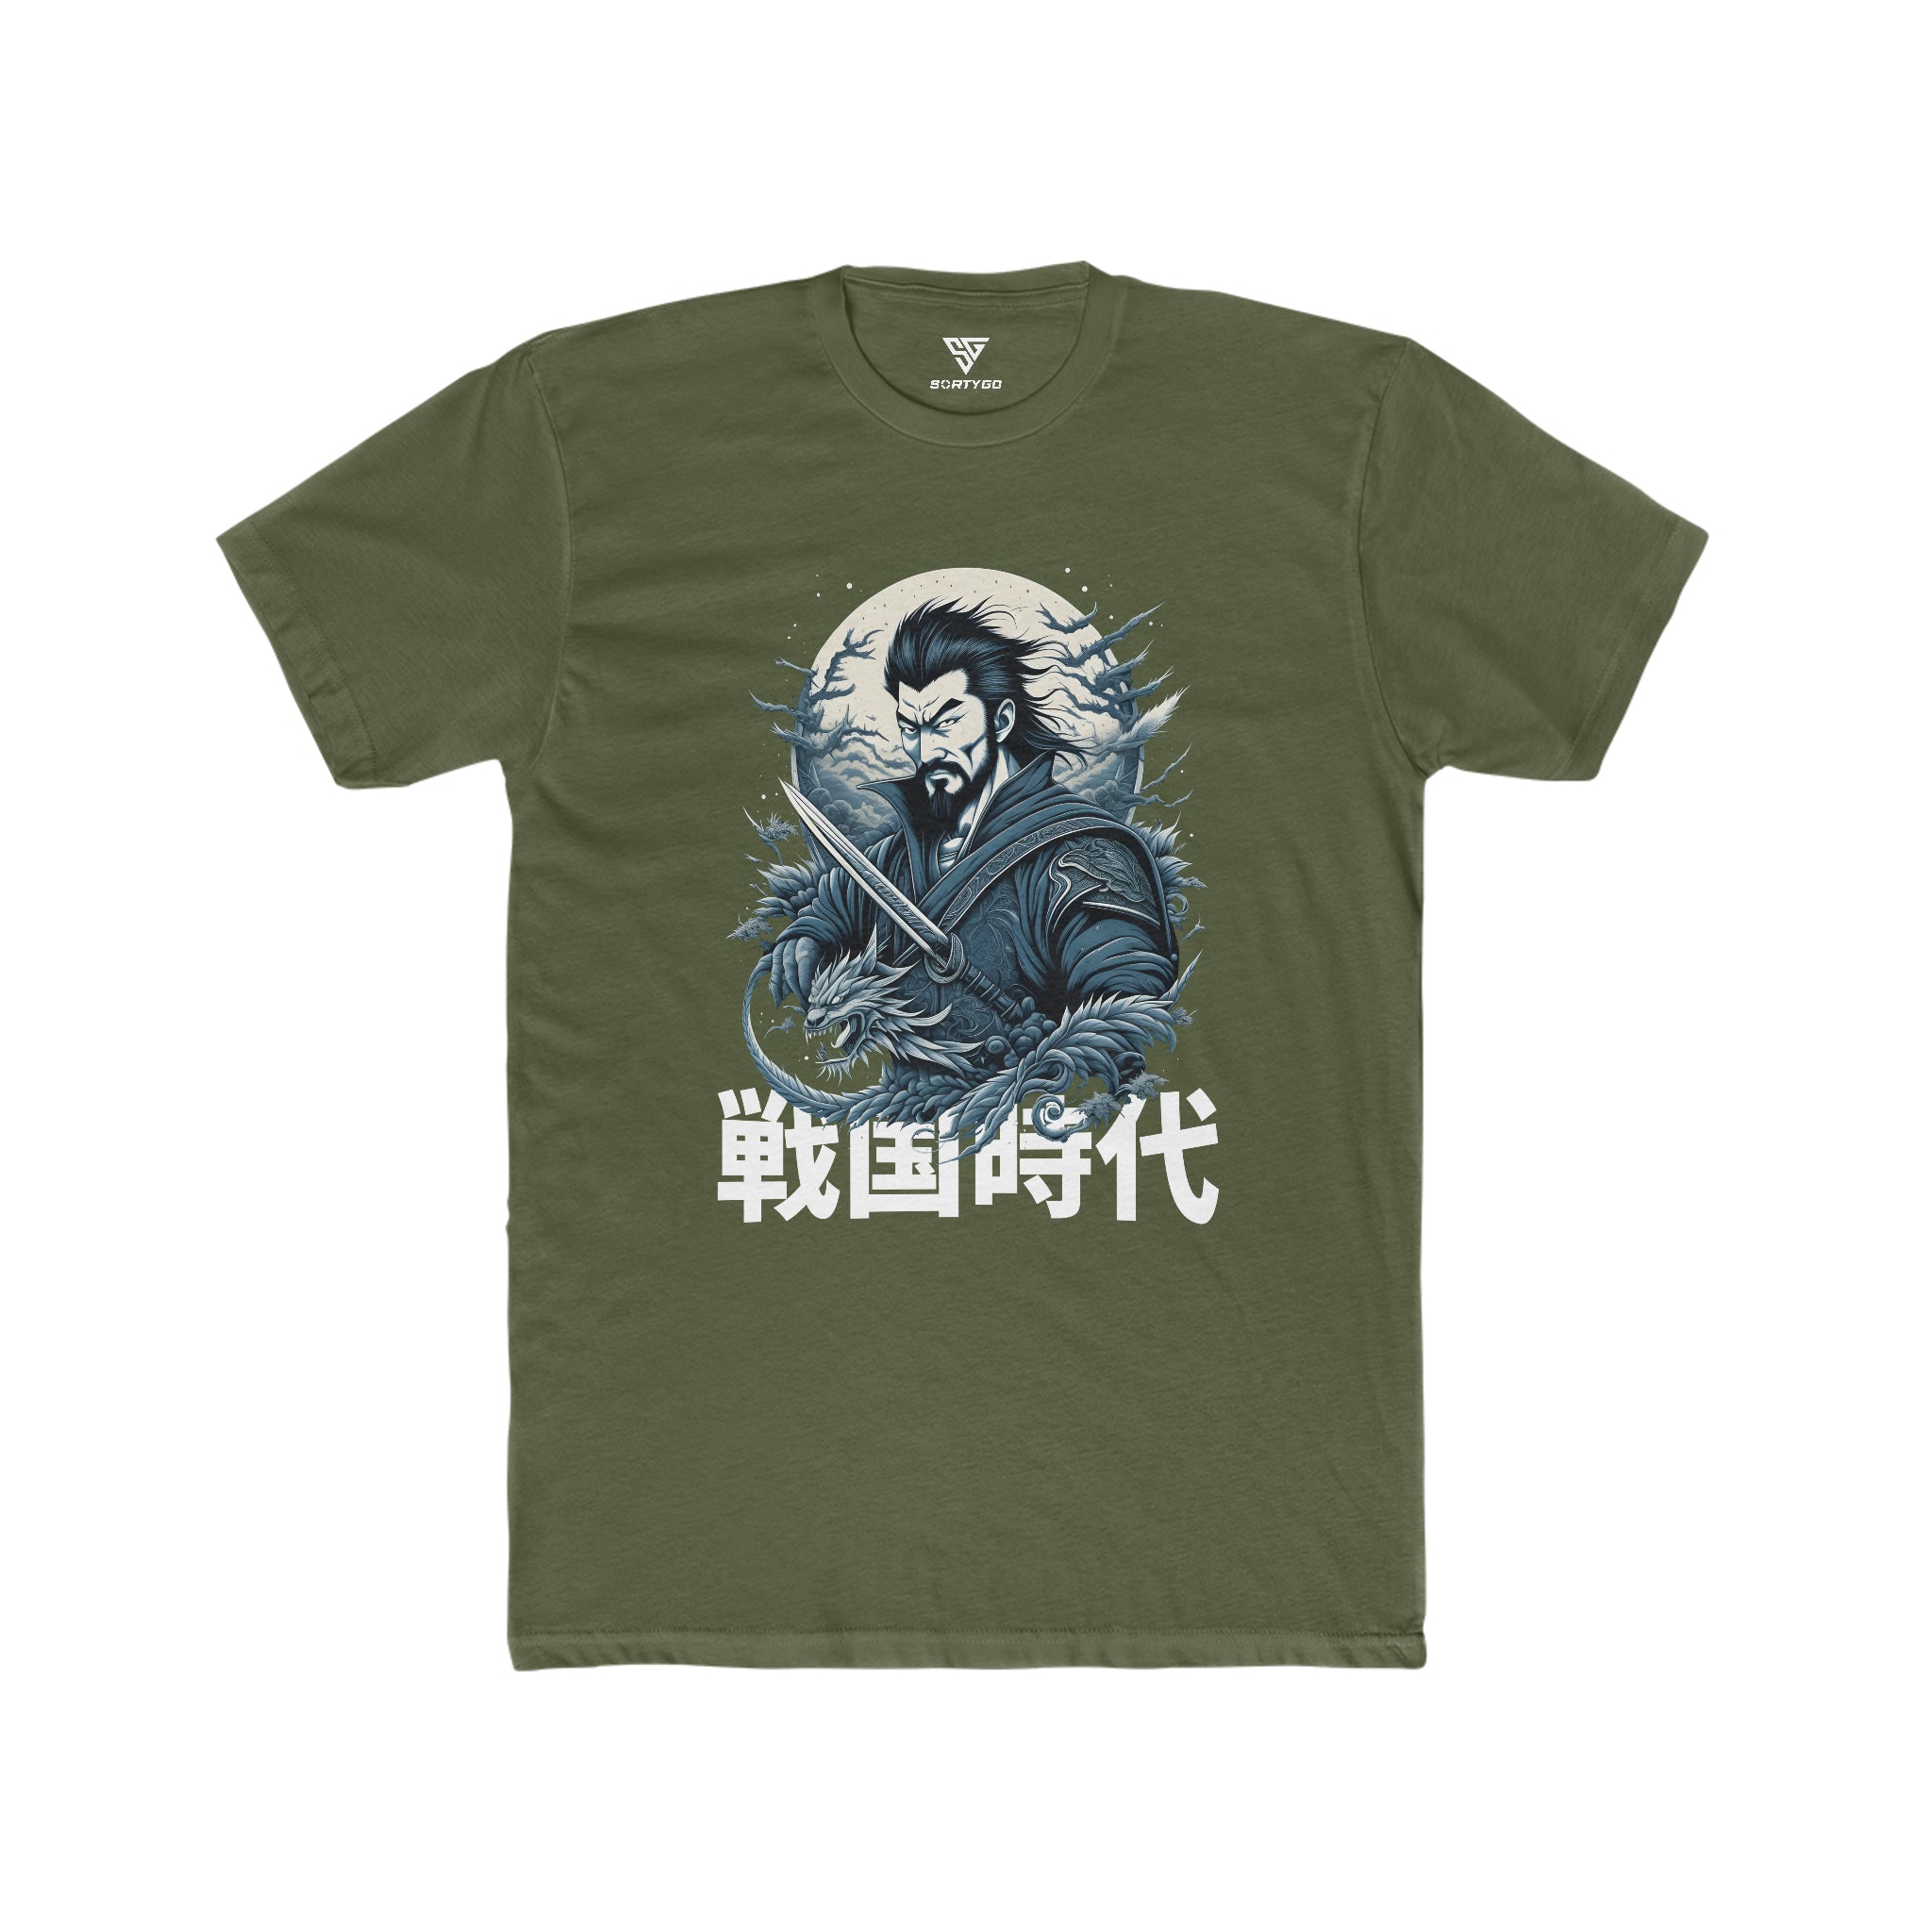 SORTYGO - Japanese Warrior Men Fitted T-Shirt in Solid Military Green